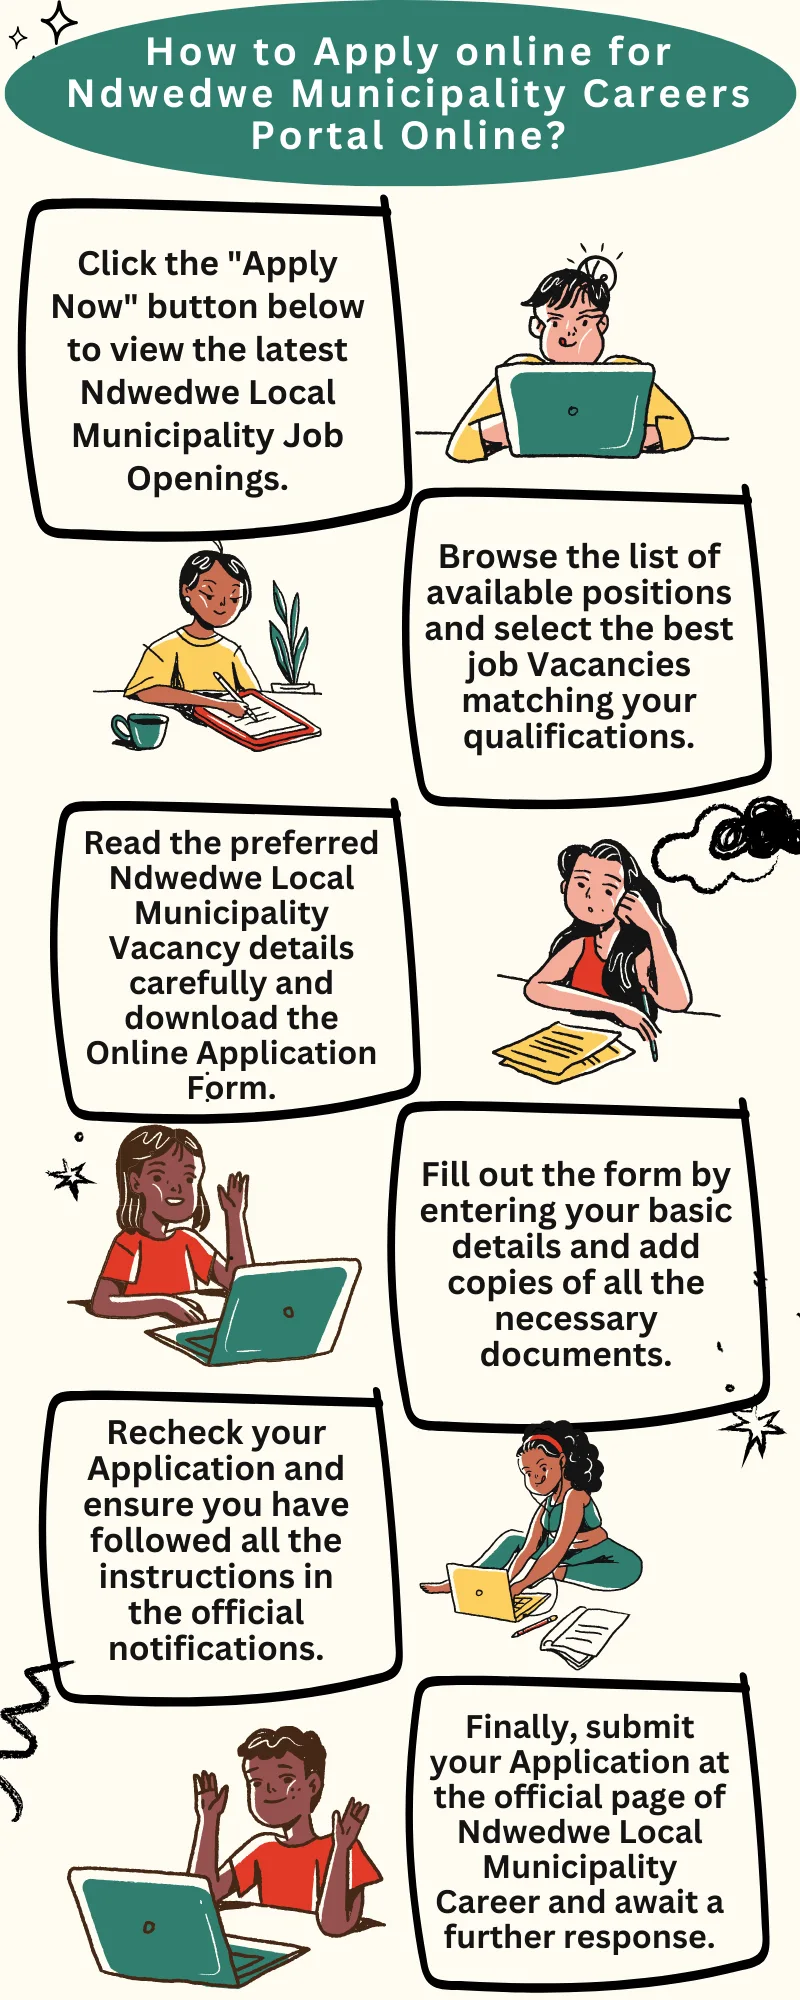 How to Apply online for Ndwedwe Municipality Careers Portal Online?